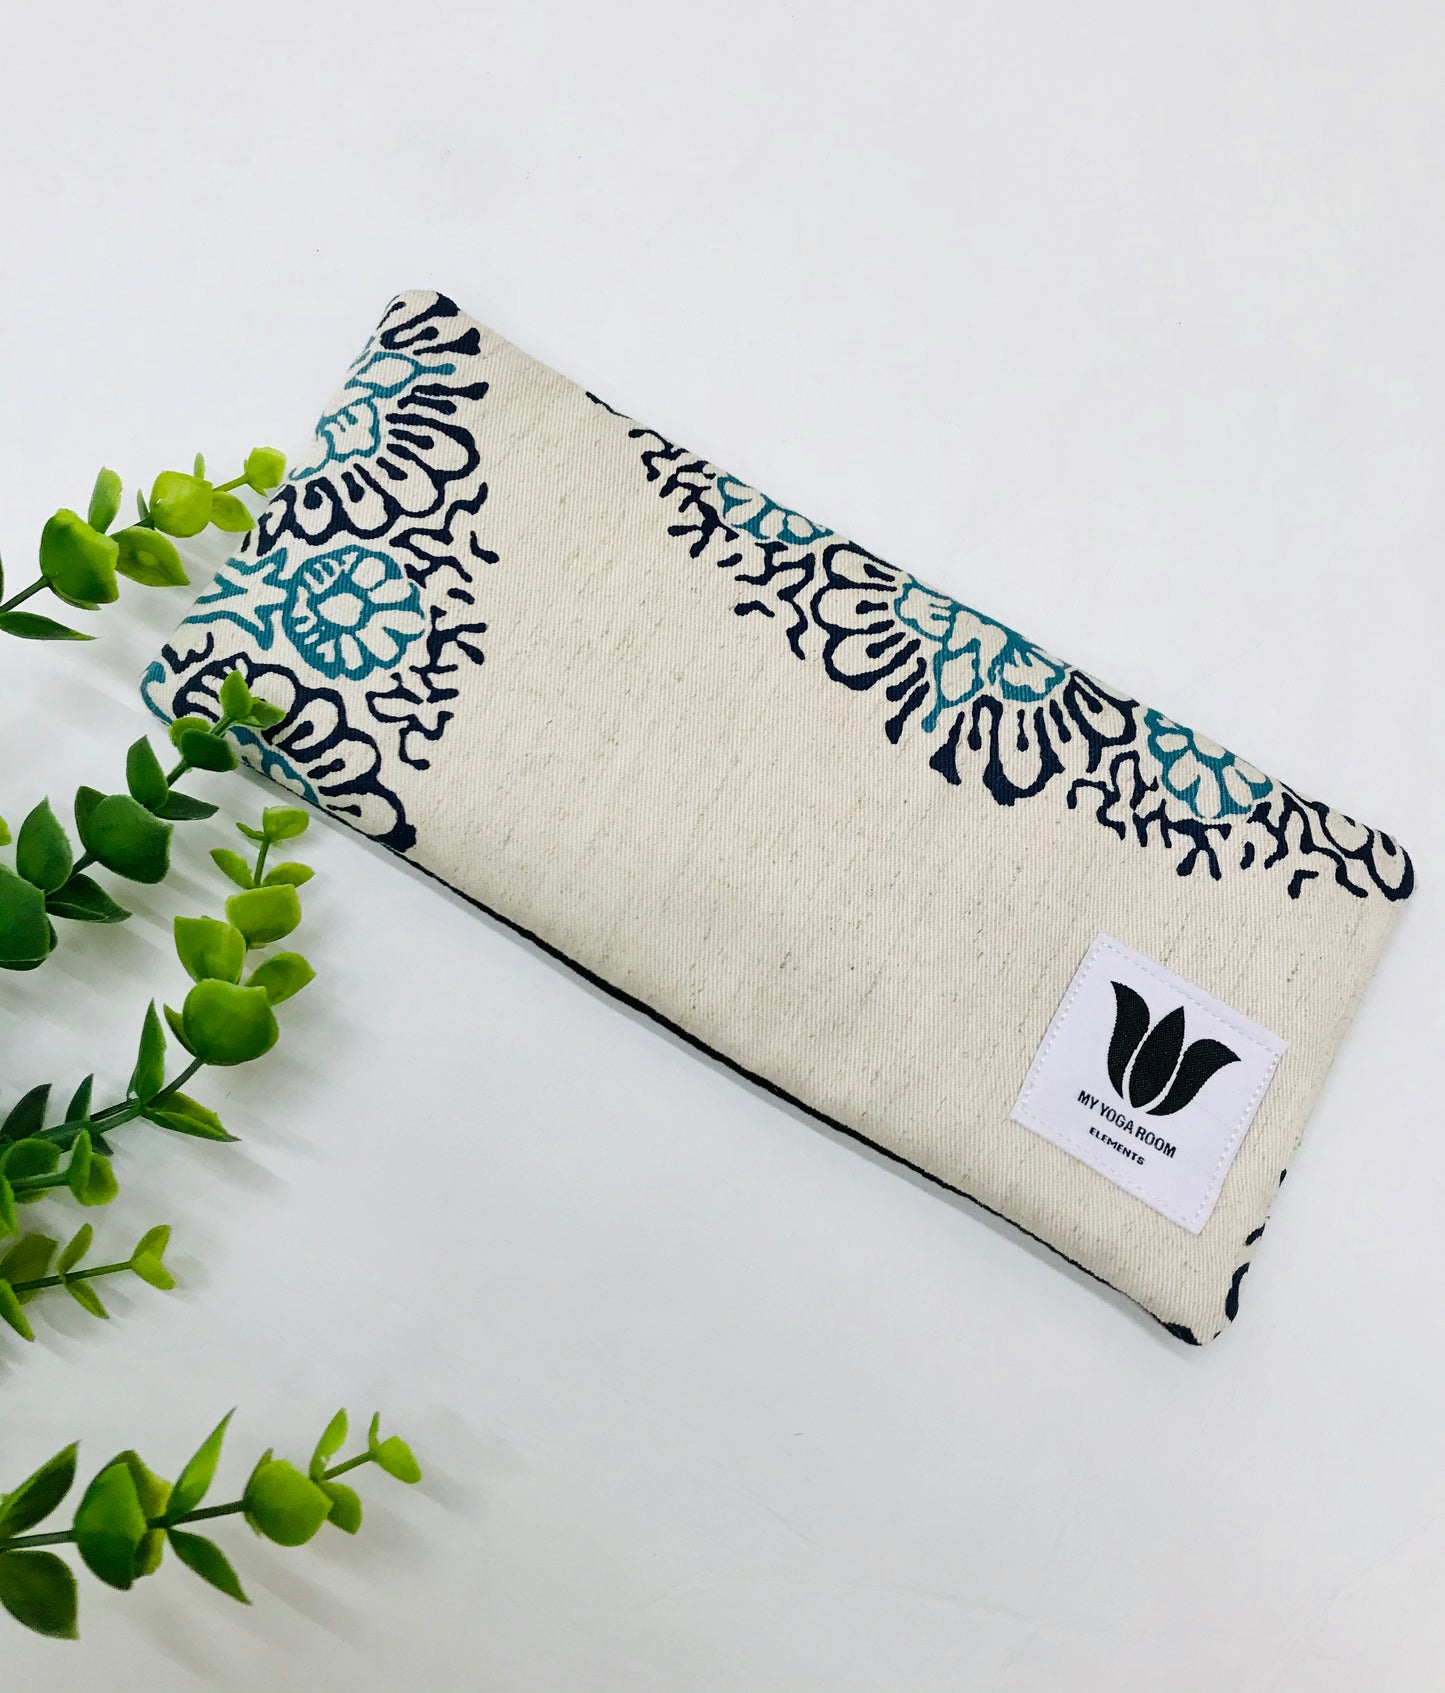 Yoga pillow, therapeutically weighted to soothe eye strain and stress in natural linen and bamboo mandala fabric. Handcrafted in Canada by My Yoga Room Elements.